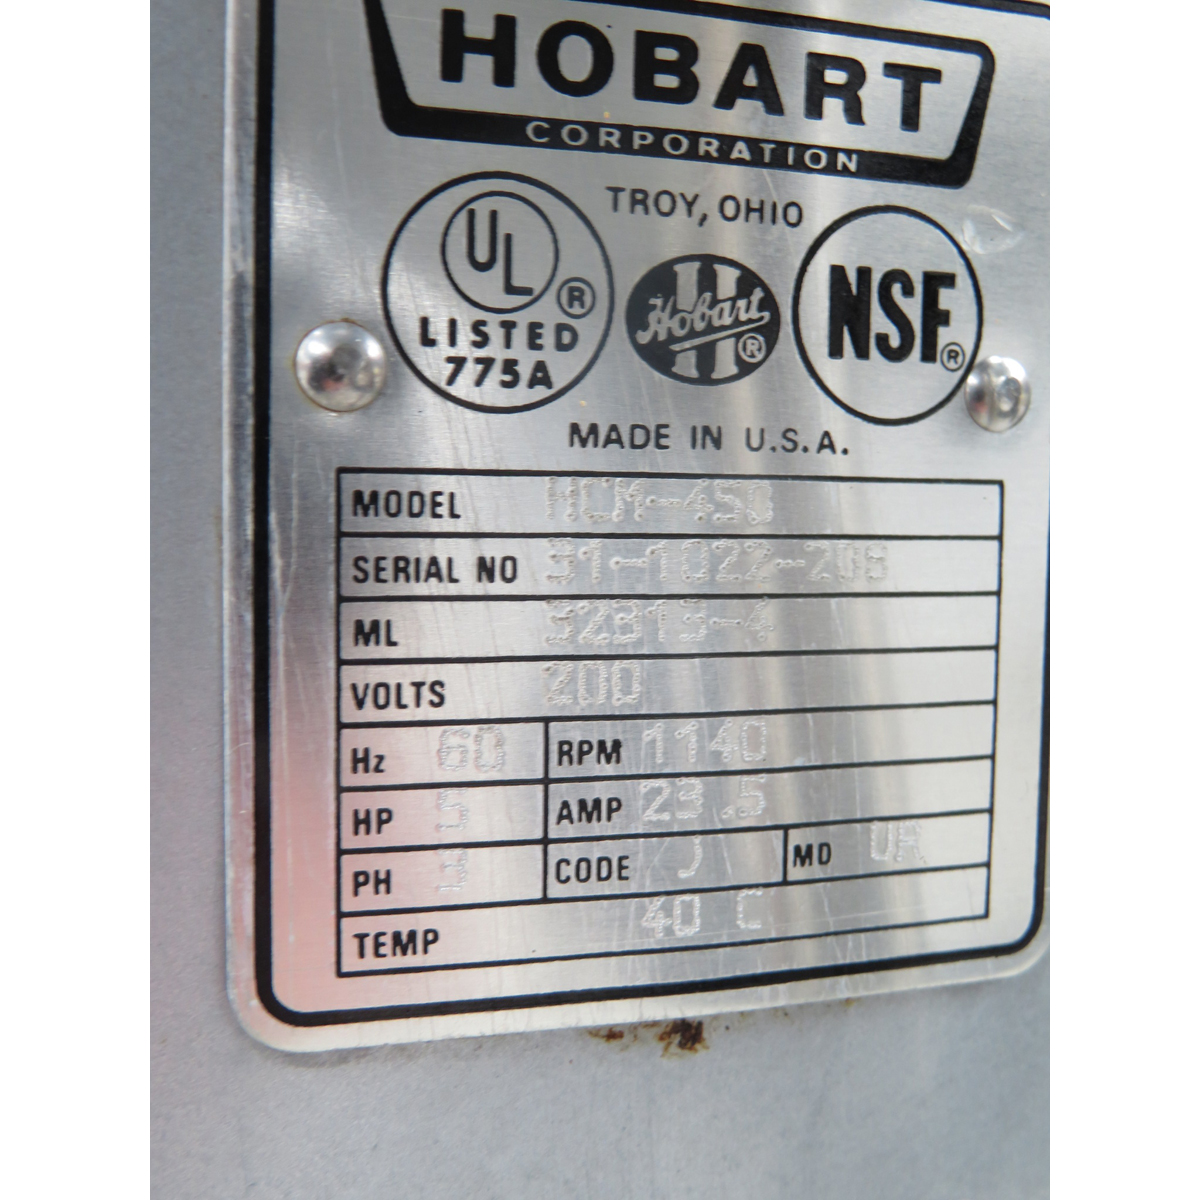 Hobart HCM-450 45 Quart - Brand New Blades - Vertical Cutter Mixer, Used Great Condition image 4